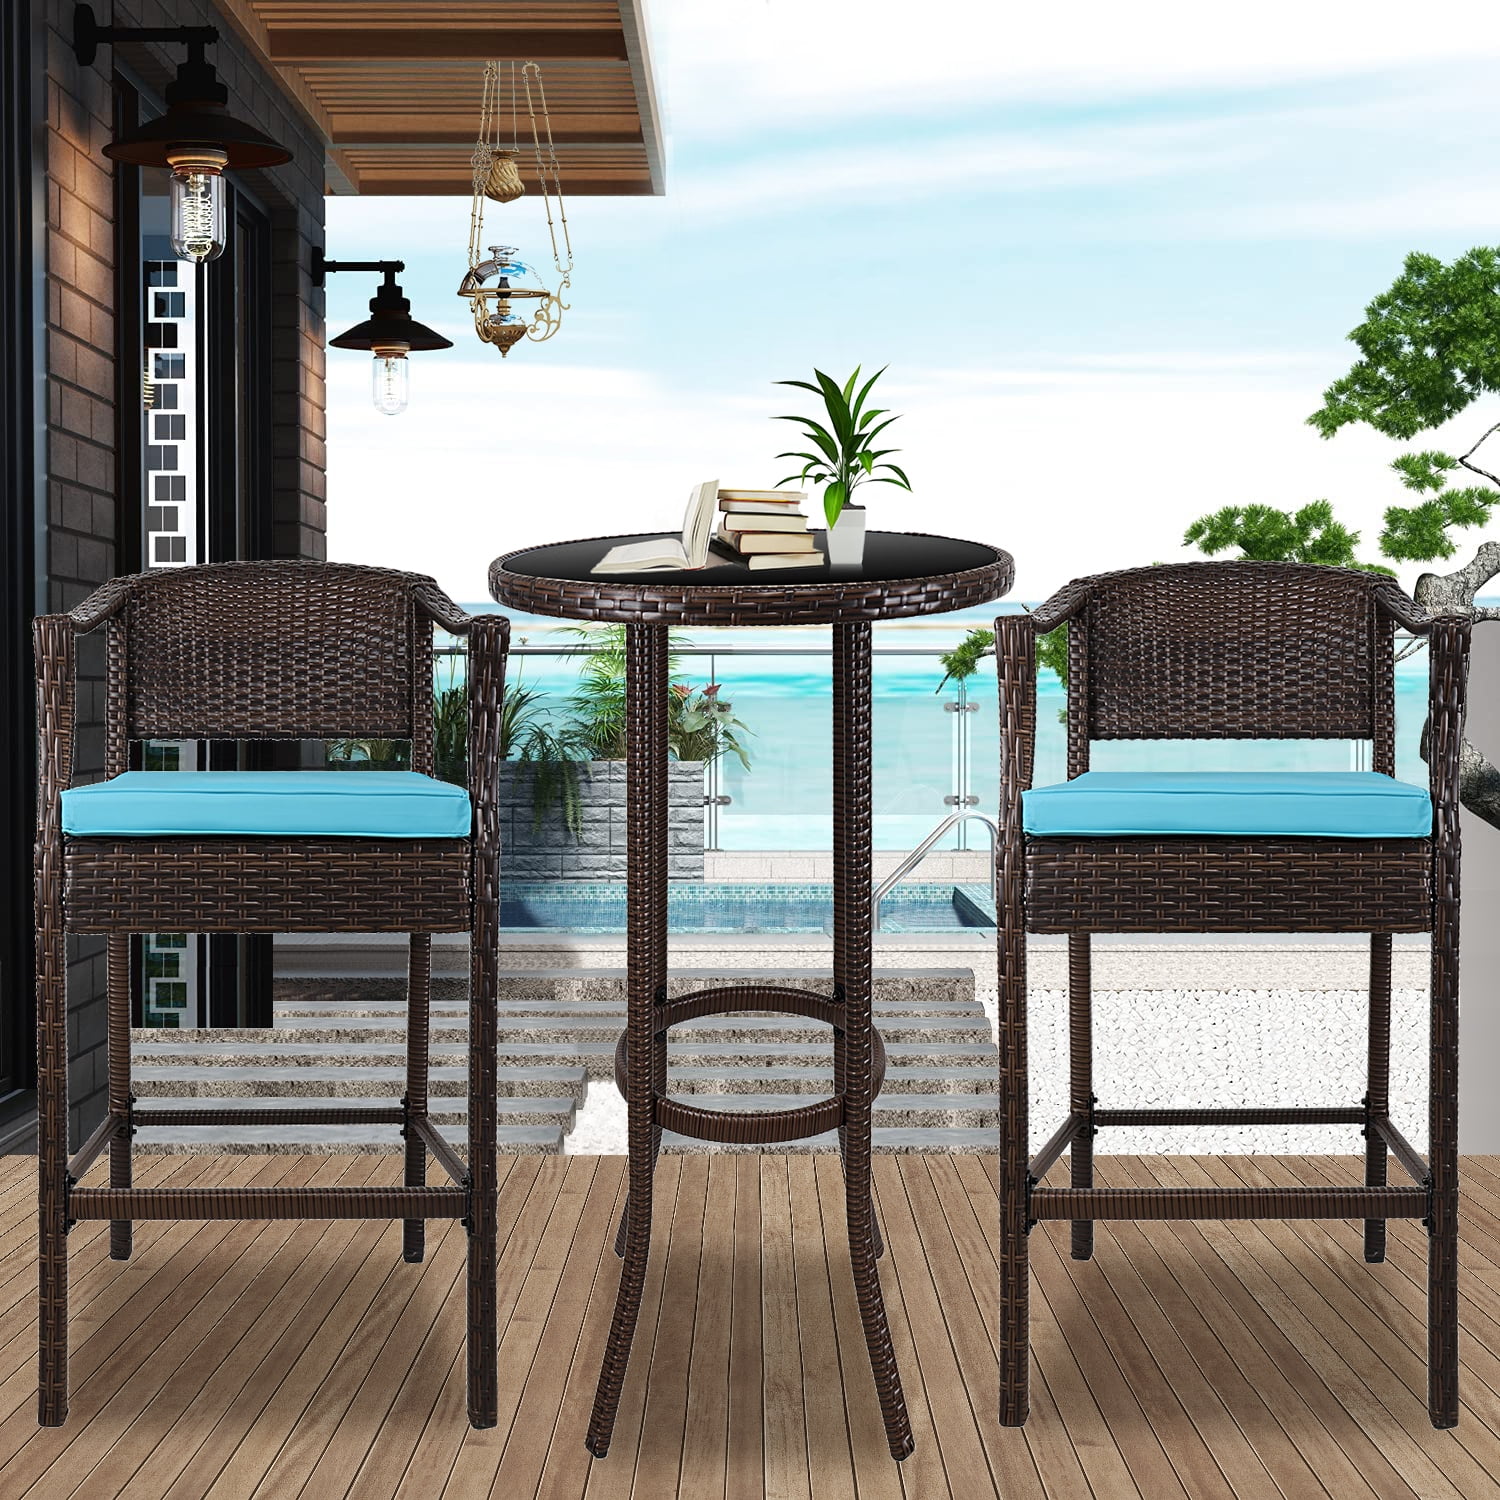 Mainstay* Premium Outdoor Bistro Sets Patio Furniture Set Table 3 Piece Bar Height Seating in Blue 